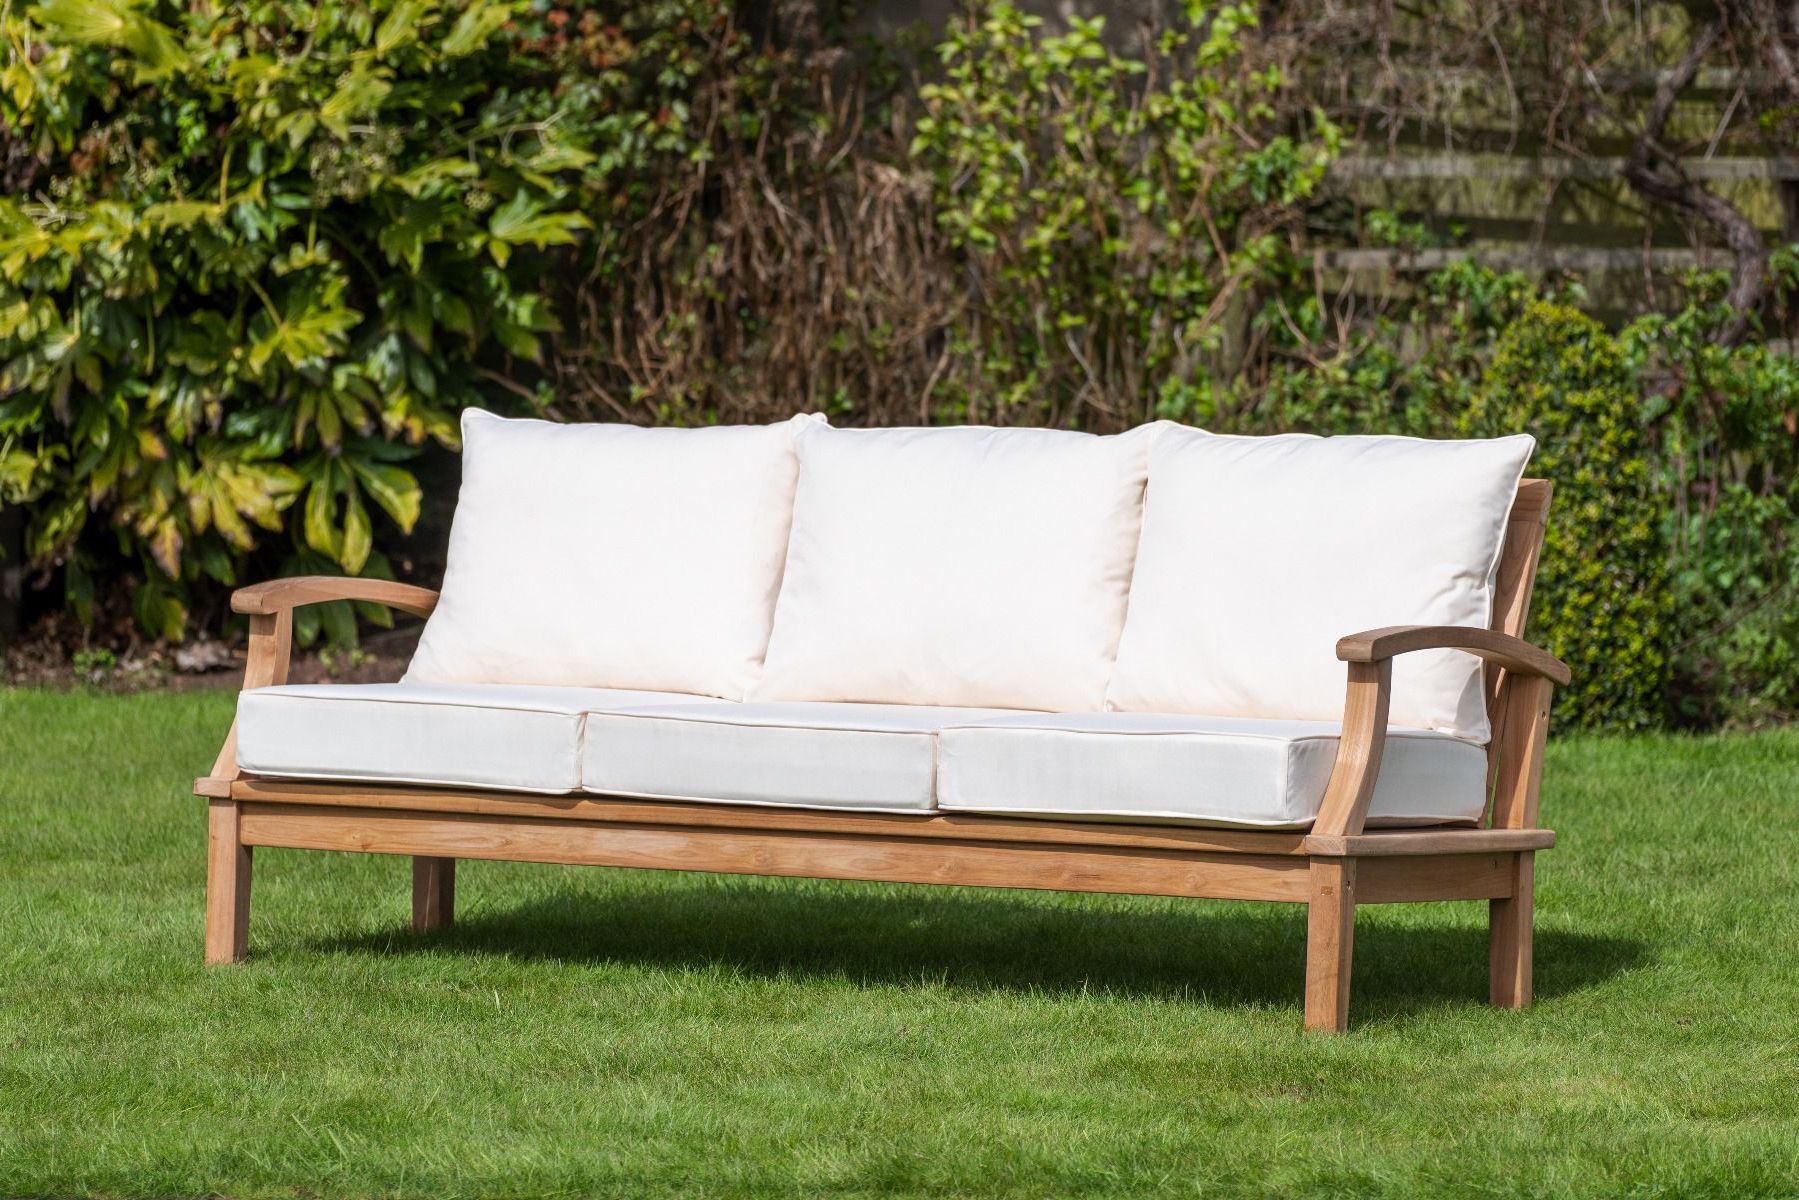 Sloane & Sons Throughout Fashionable Wood Sofa Cushioned Outdoor Garden (Photo 2 of 15)